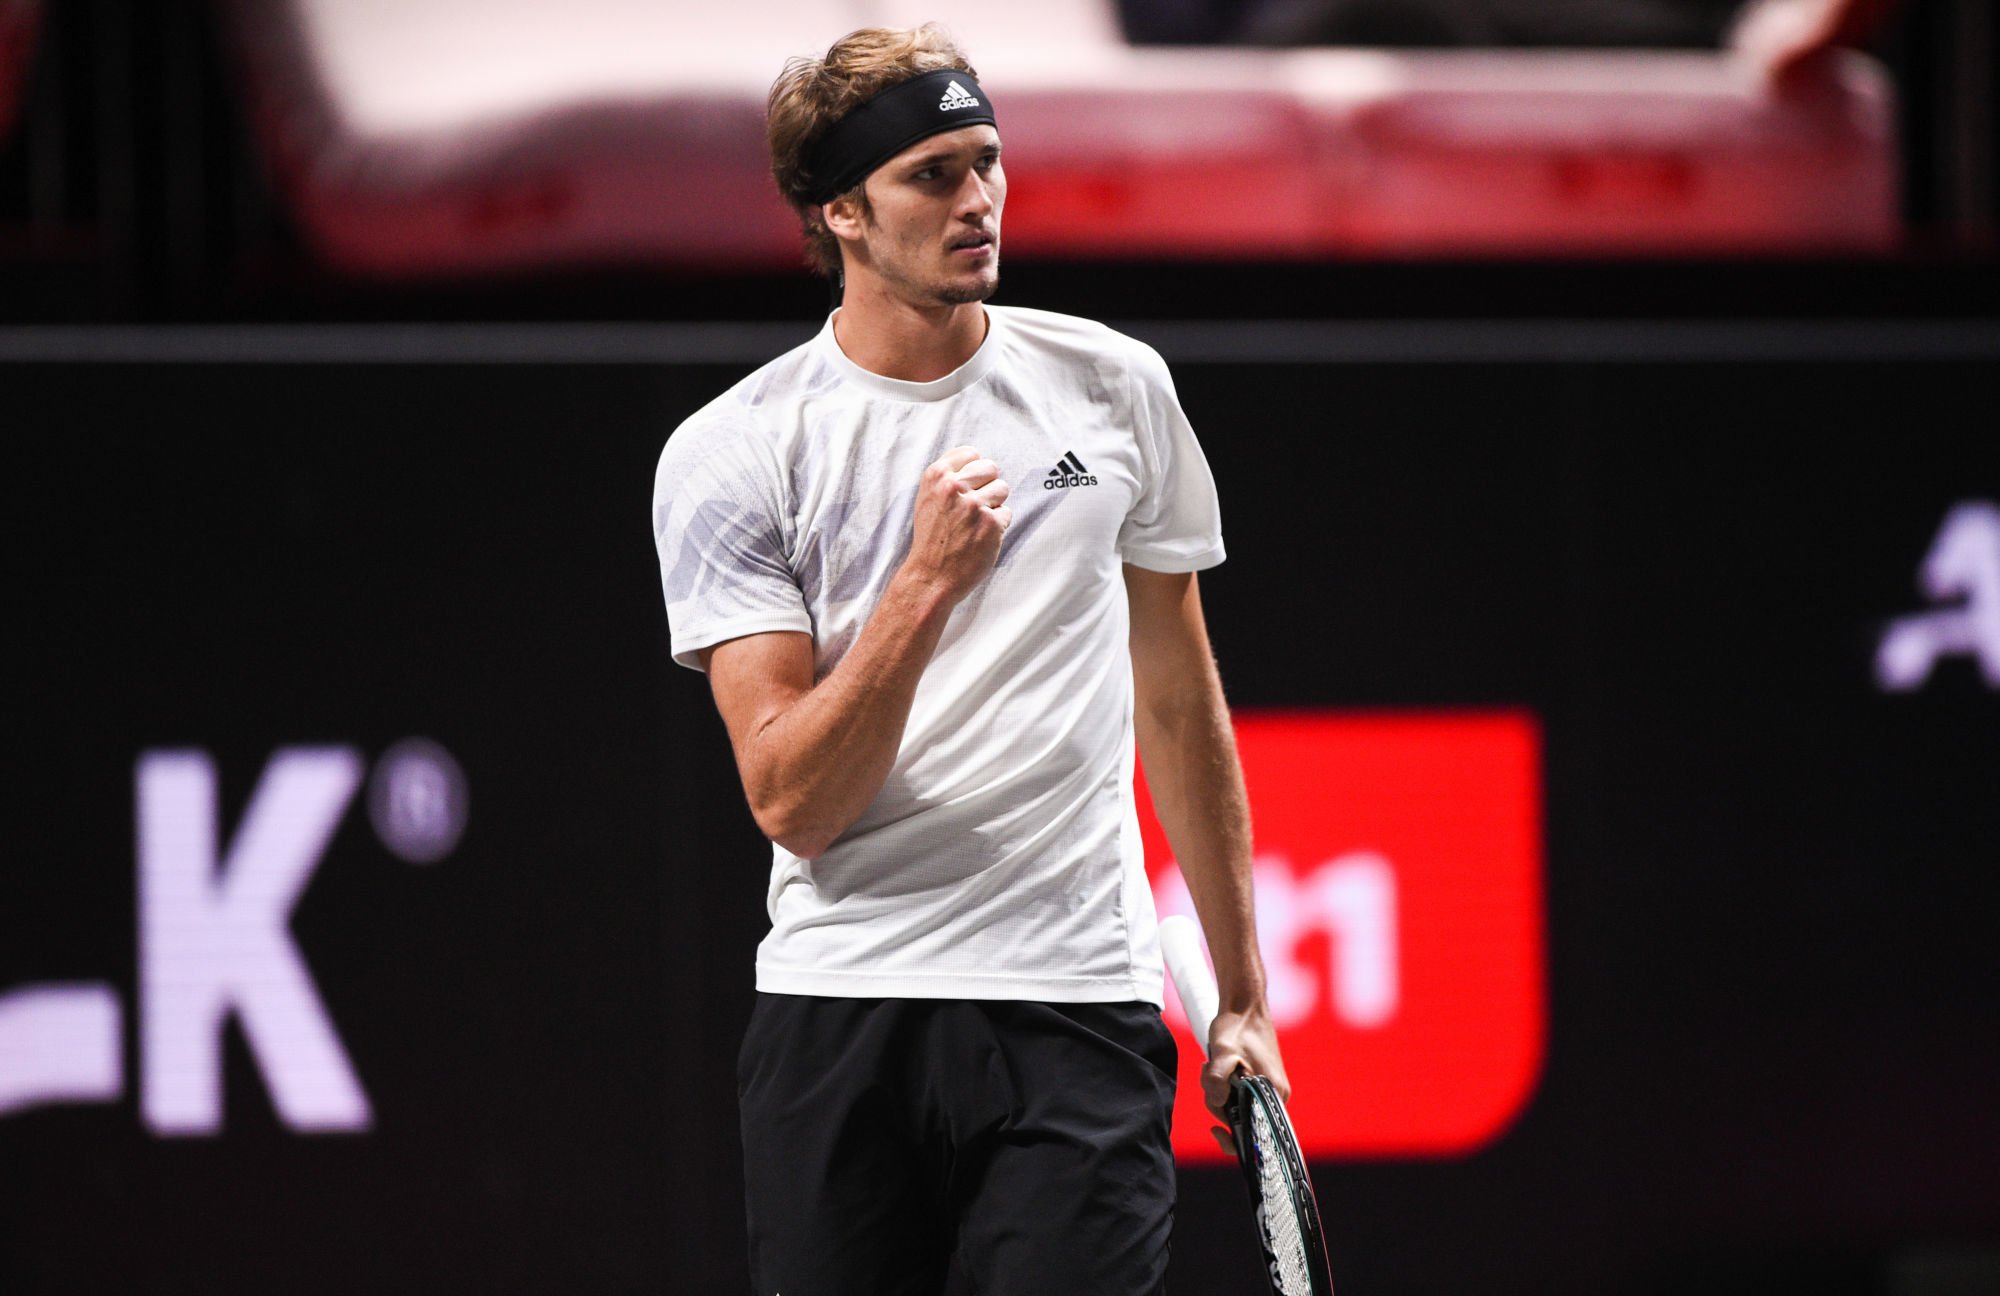 23 October 2020, North Rhine-Westphalia, Cologne: Tennis: ATP Tour - Cologne Championships (ATP), singles, men, quarter-finals, Zverev (Germany) - Mannarino (France). Alexander Zverev clenches his fist after winning a point. Photo: Jonas Güttler/dpa 
By Icon Sport - Cologne (Allemagne)